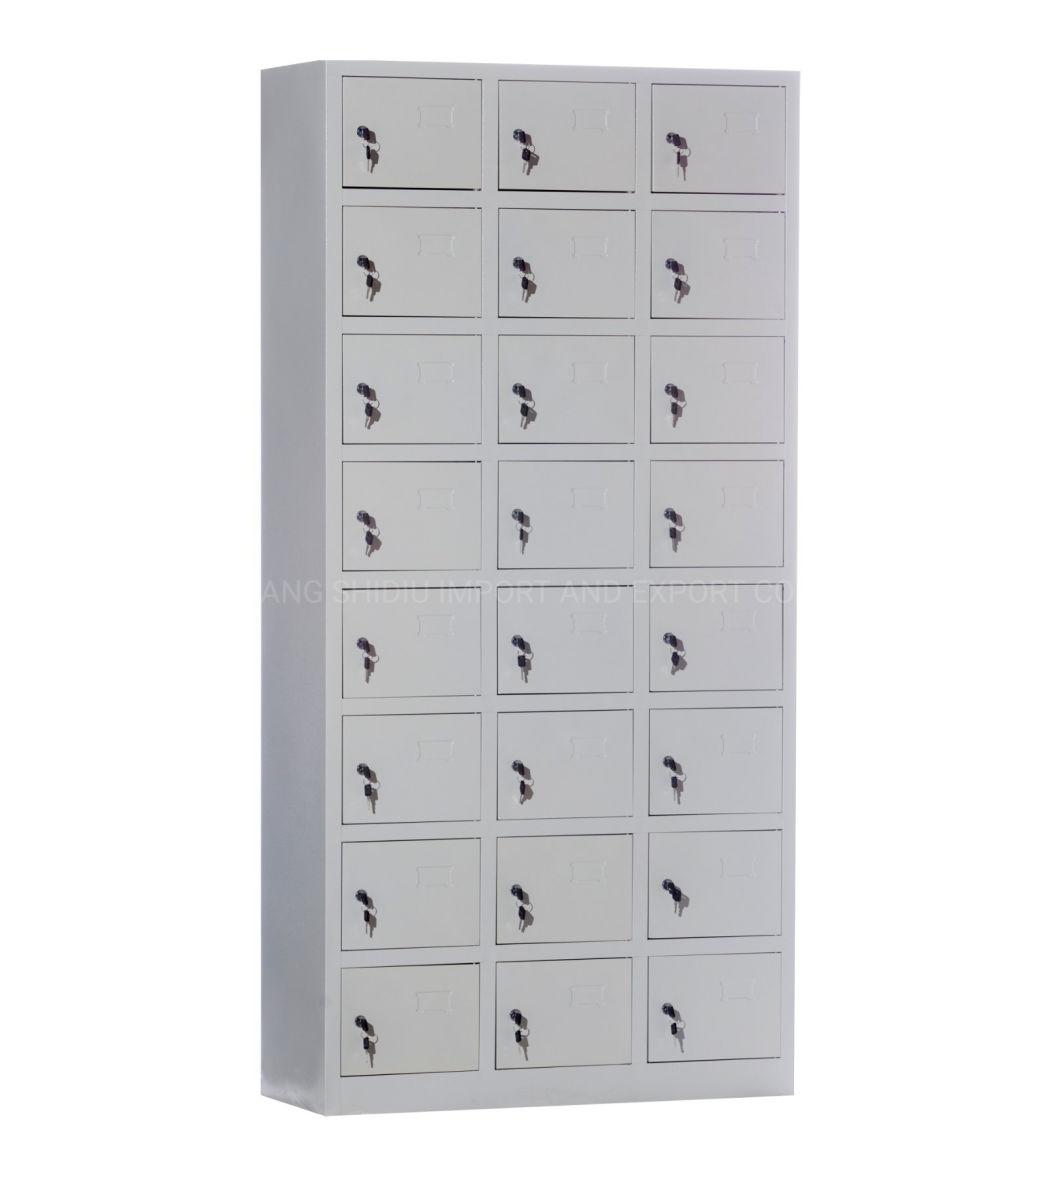 Multiple Function Style 8 Tier Box Metal Locker for Books/Wallets/Cell Phones